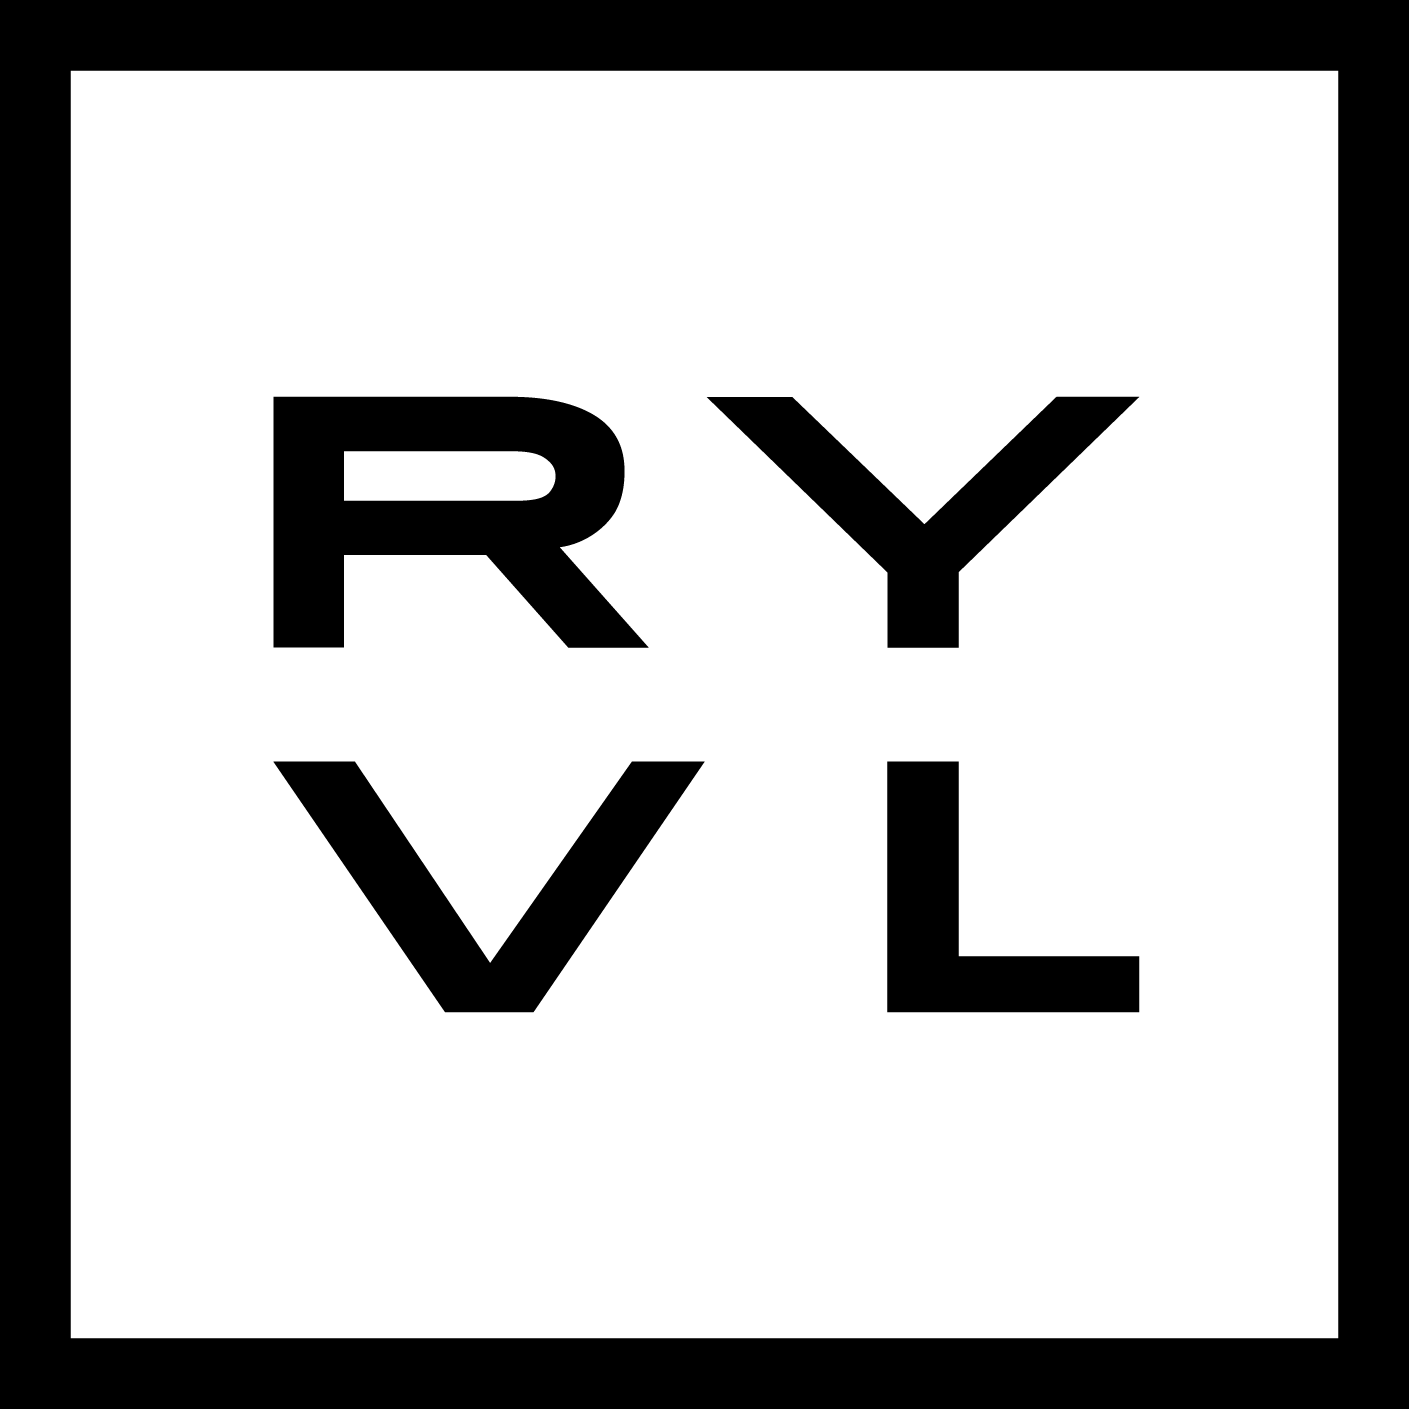 Brand with VL Logo - The Marketing Group changes its name to RYVL in global rebrand ...